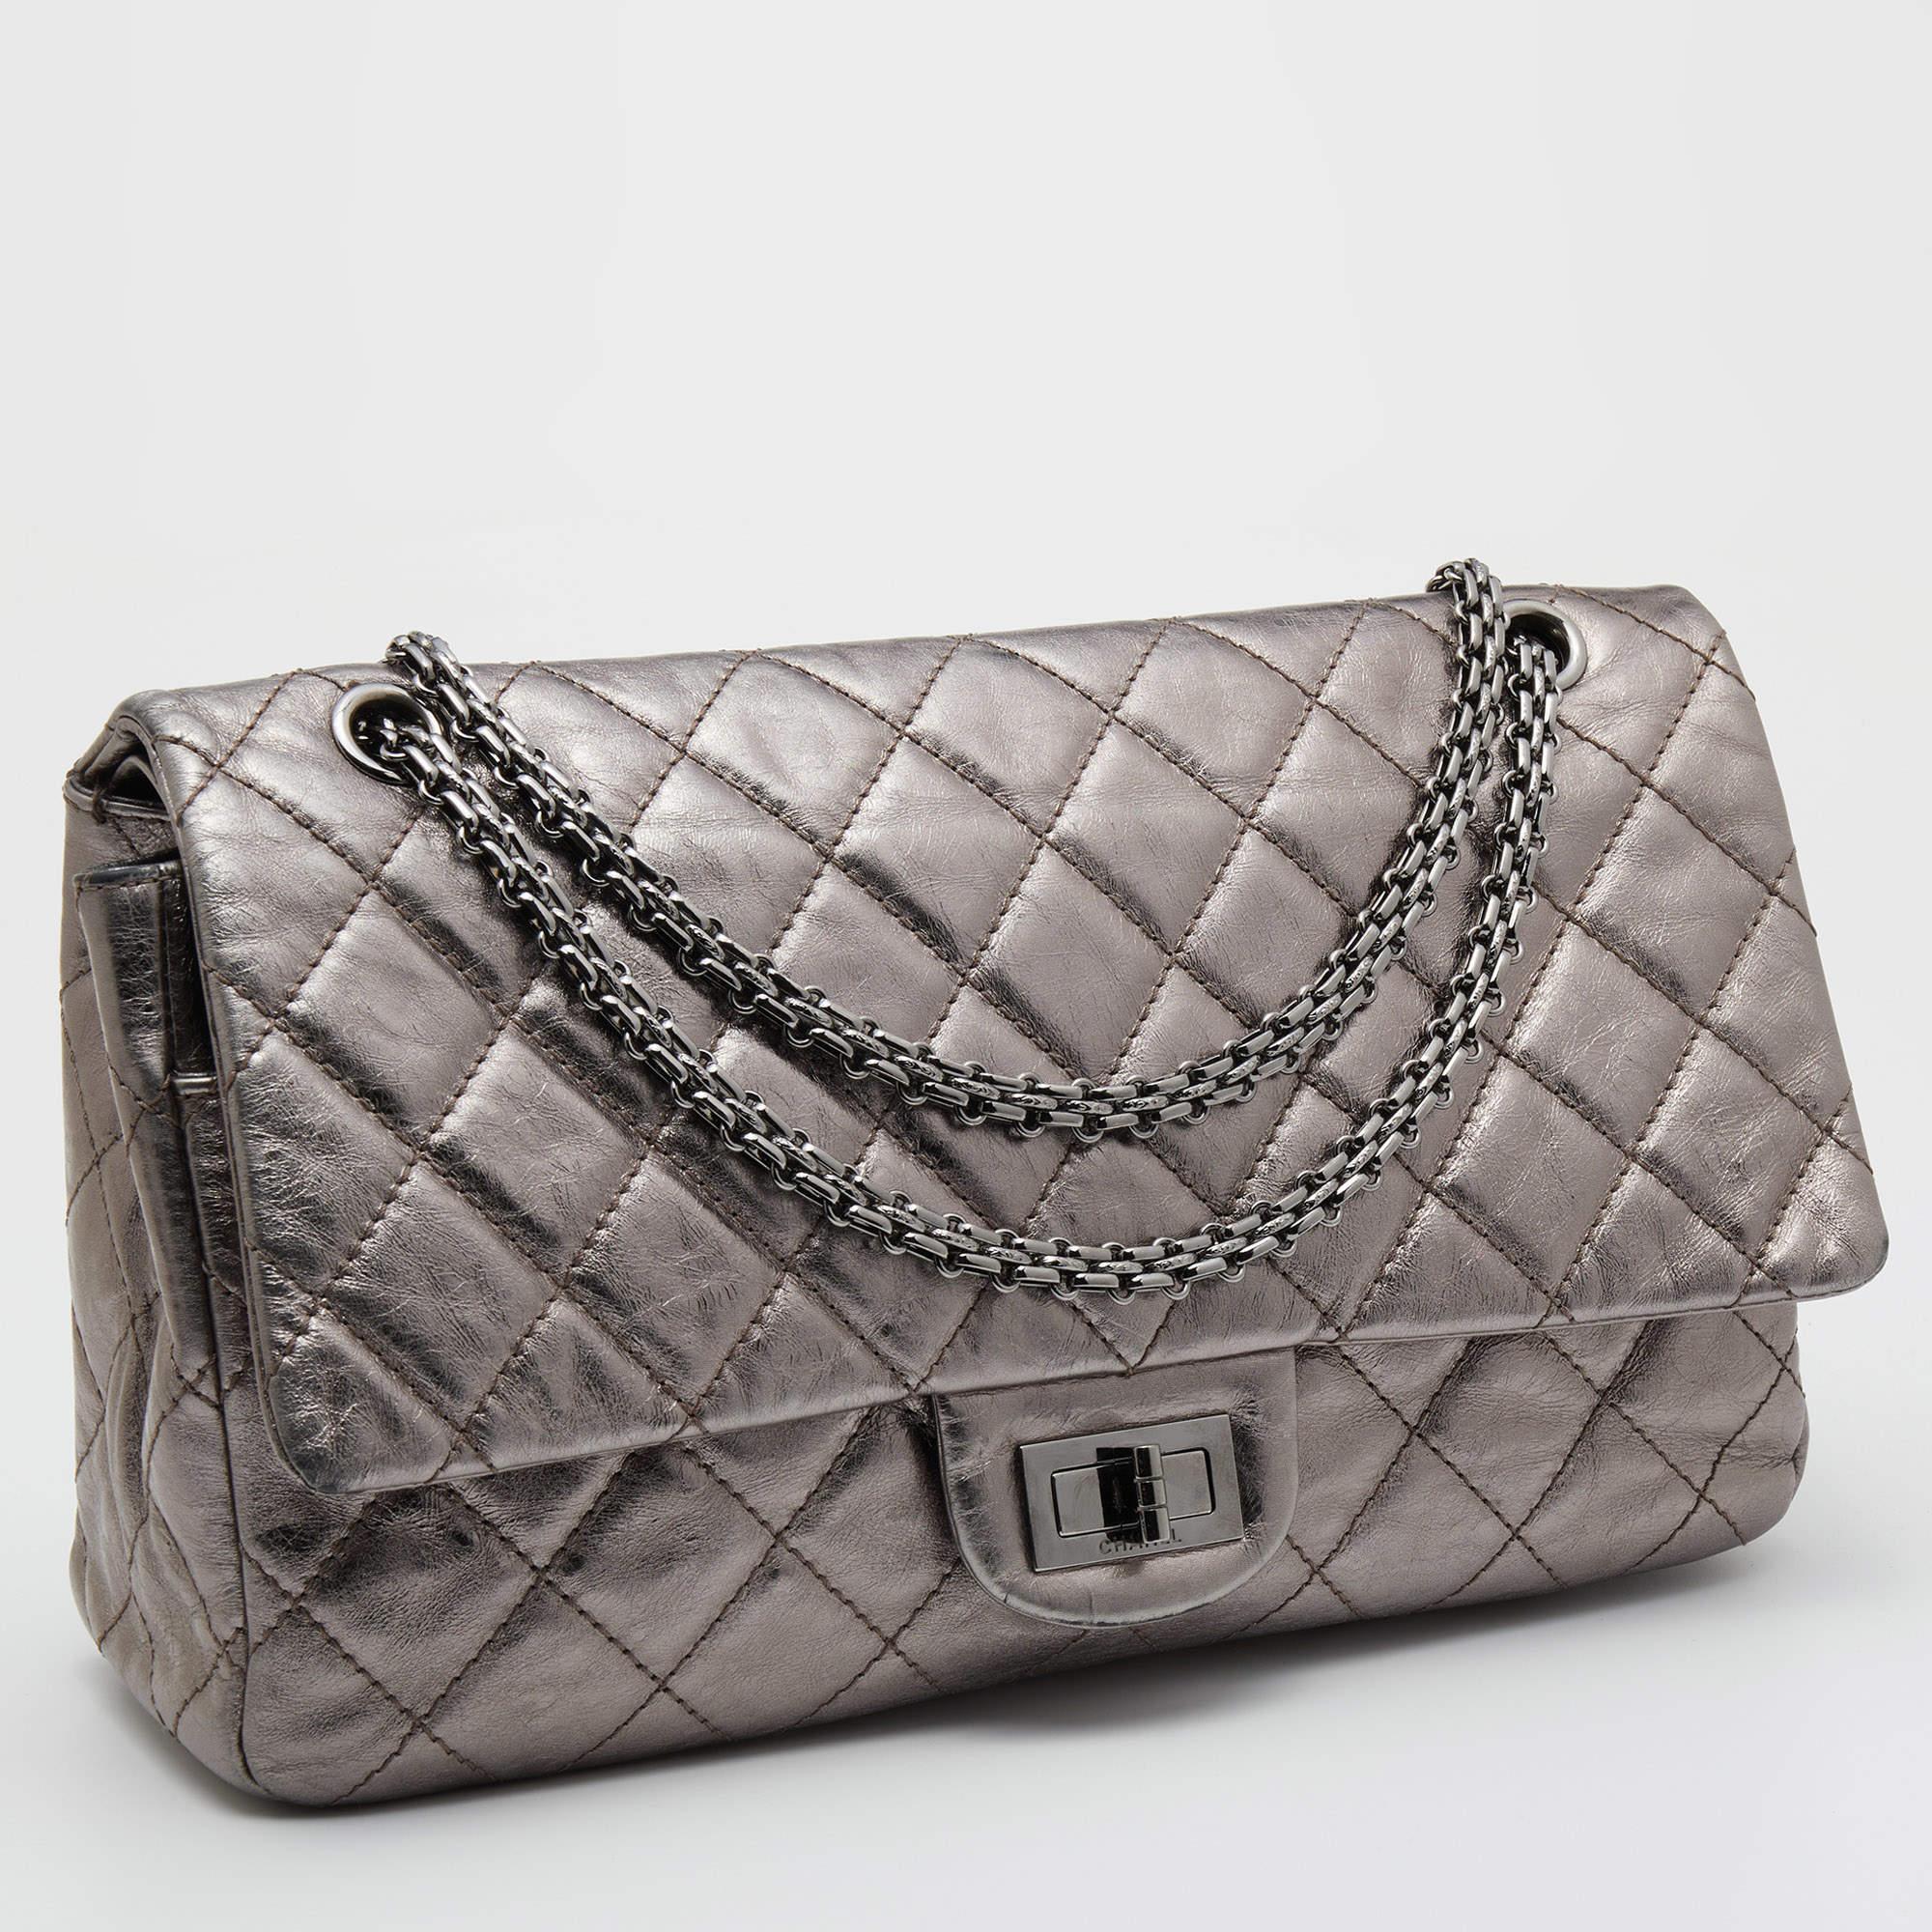 Gray Chanel Metallic Quilted Aged Leather Reissue 2.55 Classic 227 Flap Bag